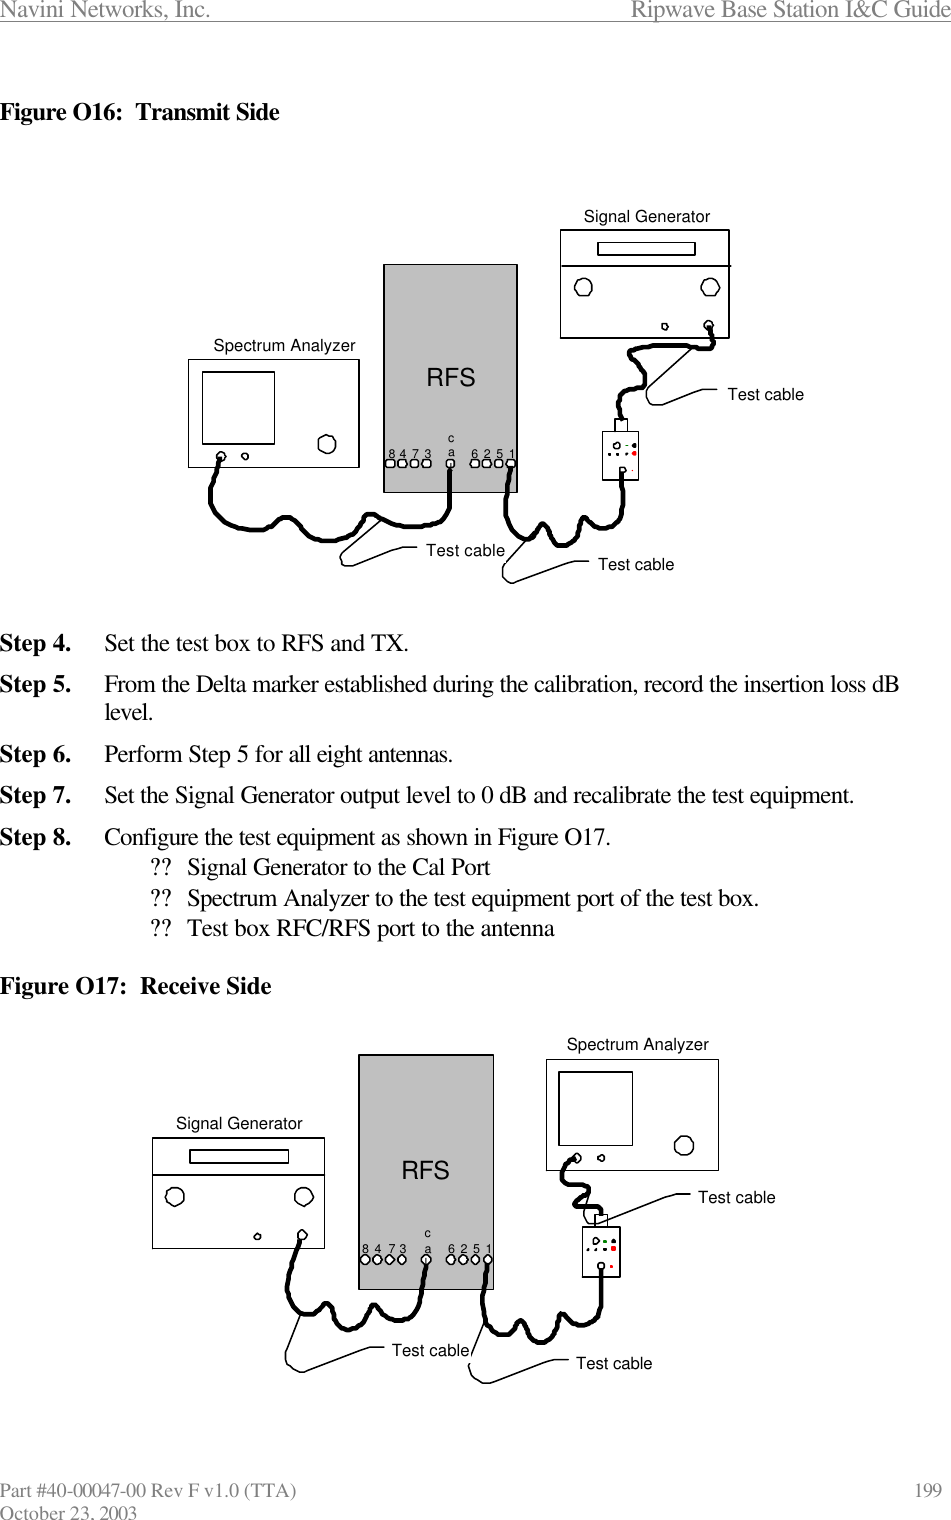 Navini Networks, Inc.                      Ripwave Base Station I&amp;C Guide Part #40-00047-00 Rev F v1.0 (TTA)            199 October 23, 2003  Figure O16:  Transmit Side                  Step 4. Set the test box to RFS and TX. Step 5. From the Delta marker established during the calibration, record the insertion loss dB level.   Step 6. Perform Step 5 for all eight antennas. Step 7. Set the Signal Generator output level to 0 dB and recalibrate the test equipment. Step 8. Configure the test equipment as shown in Figure O17. ?? Signal Generator to the Cal Port ?? Spectrum Analyzer to the test equipment port of the test box. ?? Test box RFC/RFS port to the antenna  Figure O17:  Receive Side  Signal GeneratorSpectrum AnalyzerTest cableRFS1234 5678calTest cableTest cable    Signal GeneratorSpectrum AnalyzerTest cableRFS1234 5678calTest cableTest cable 